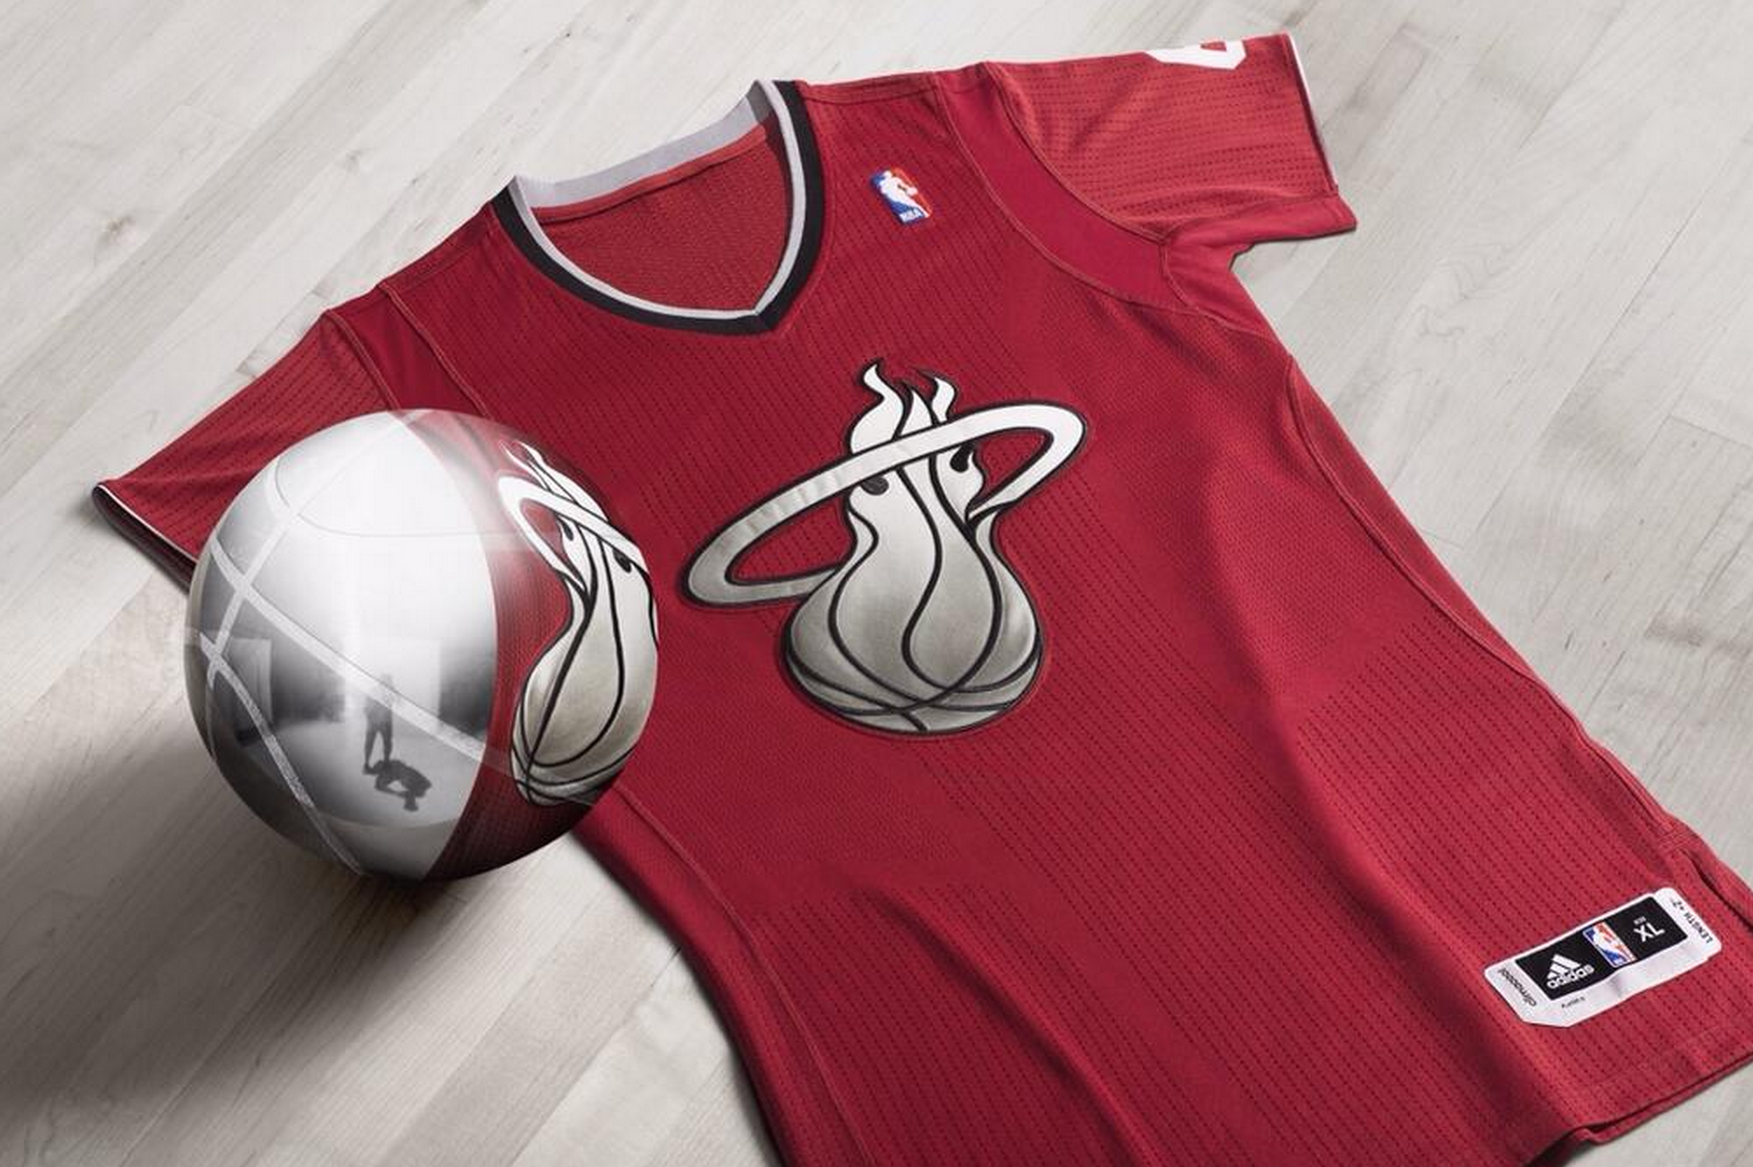 NBA Christmas Day uniforms 2013: Teams to wear new sleeved jerseys